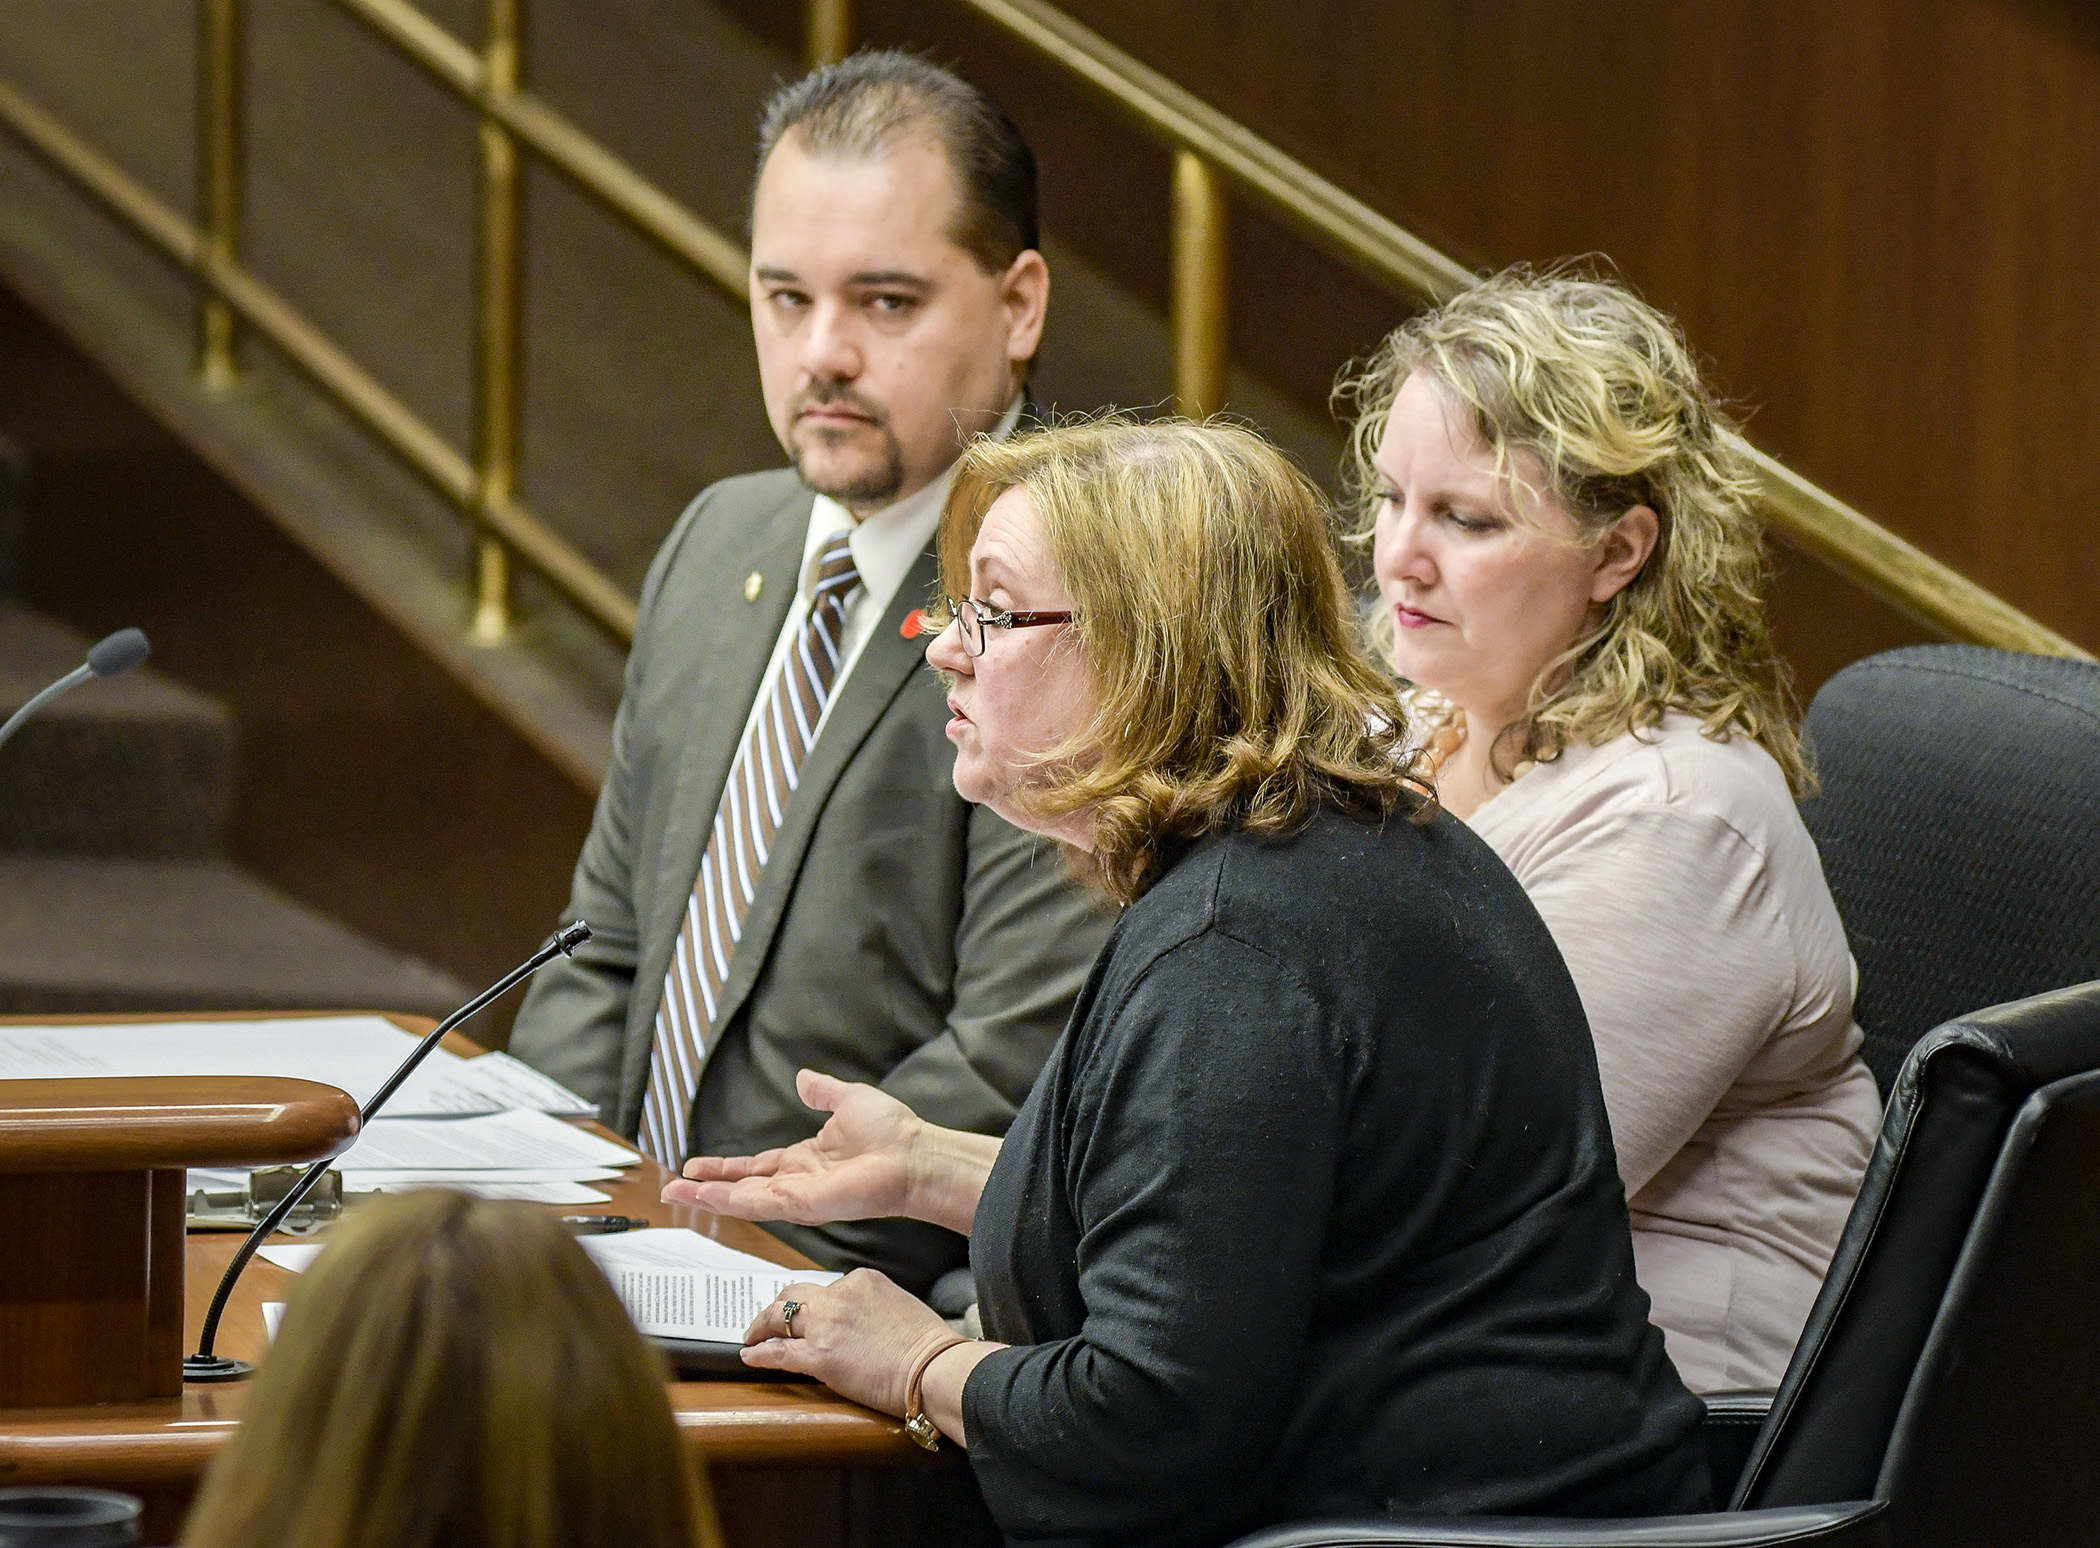 Representing Minnesota Advocates and Champions of Children, Linda Bell, center, and Kerstin Schulz, right, testify before the House Civil Law and Data Practices Policy Committee March 6 in support of a bill sponsored by Rep. Eric Lucero, left, that would create a Student Data Privacy Act. Photo by Andrew VonBank